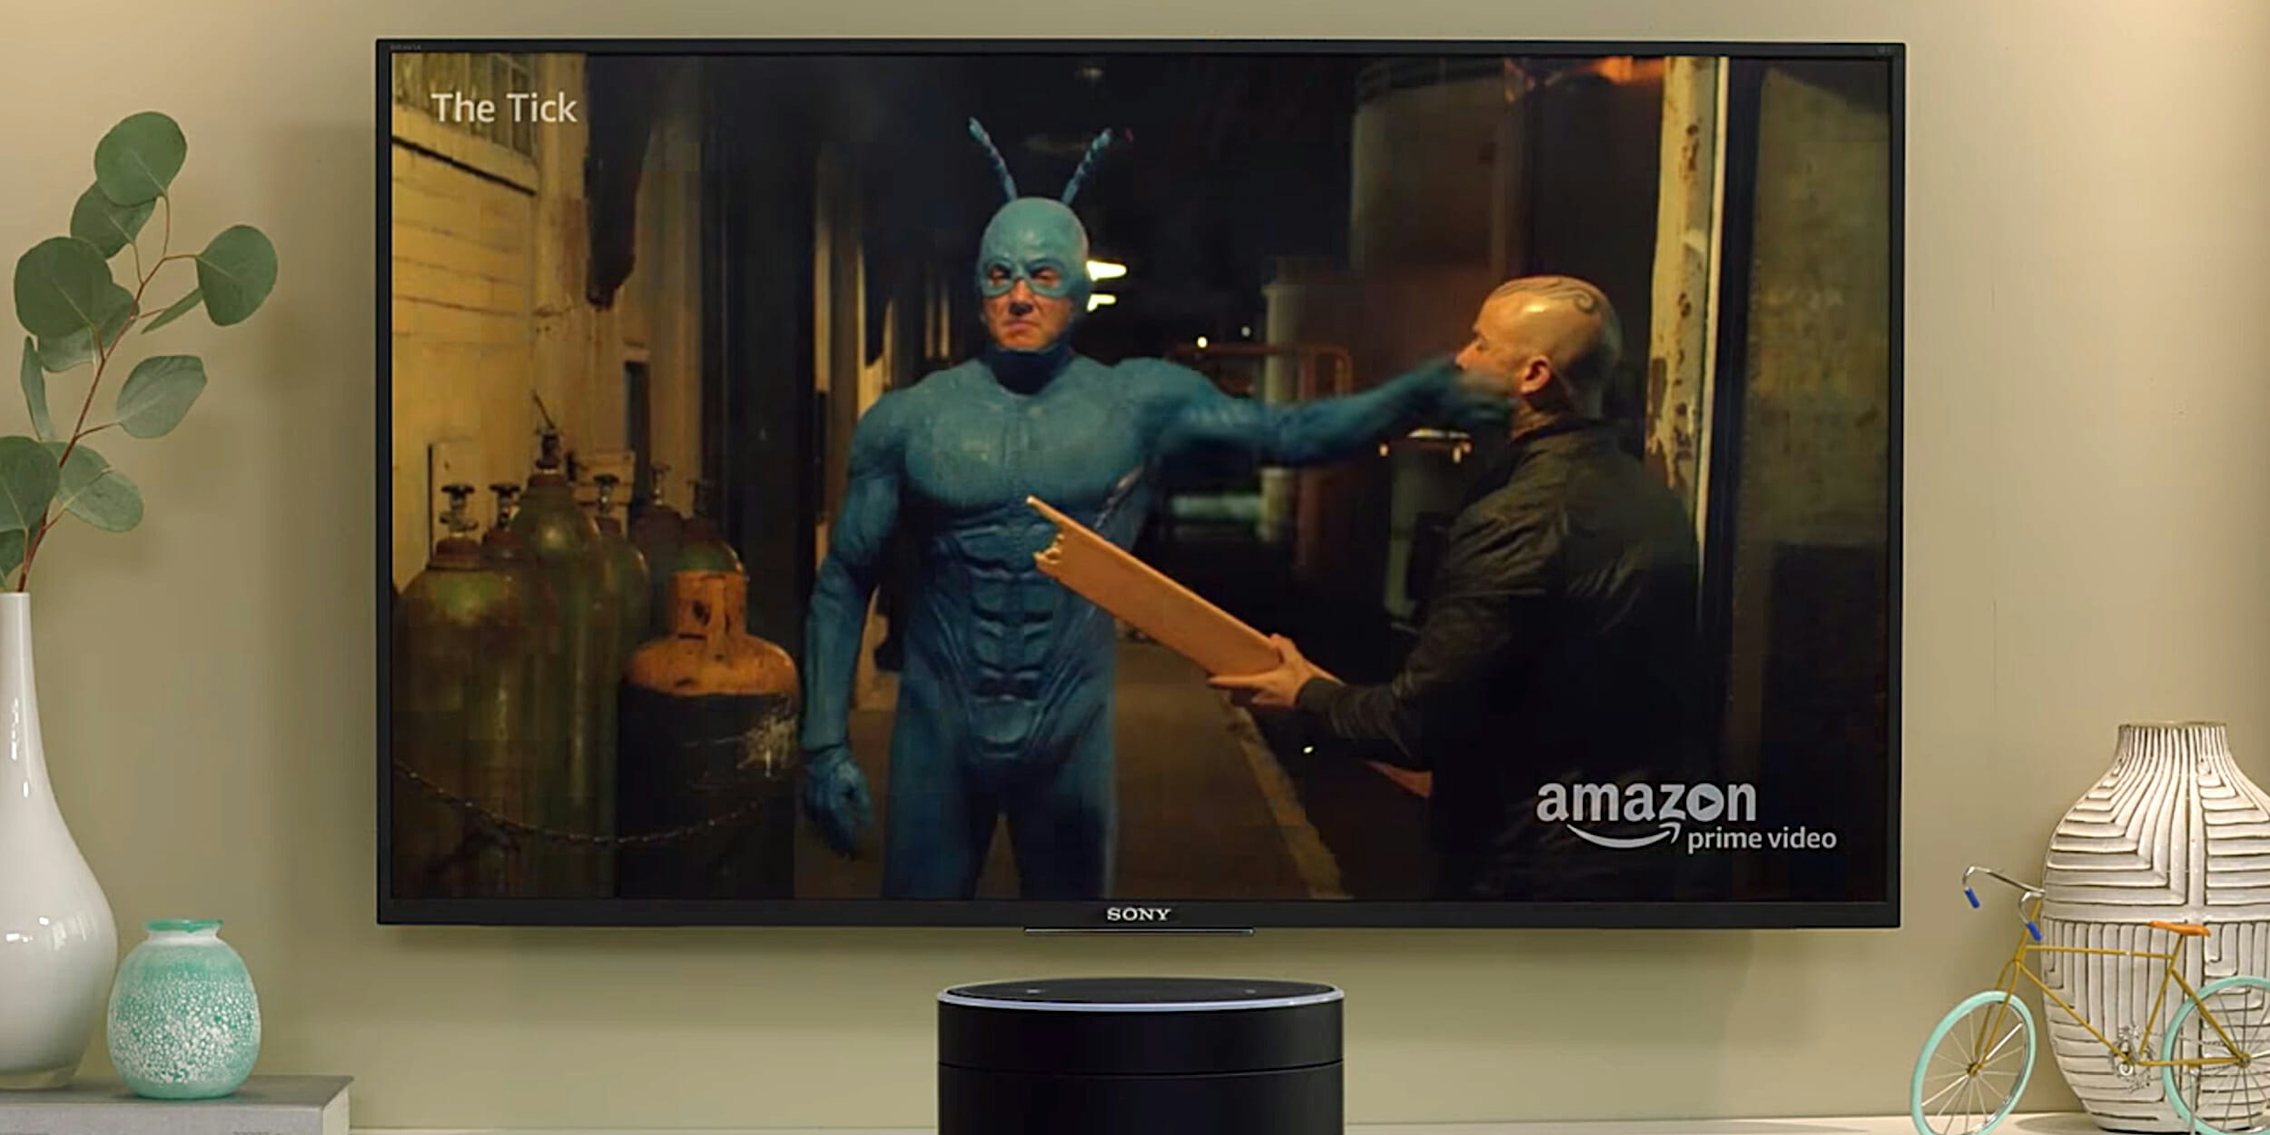 Watching 'The Tick' on Android TV controlled by Alexa